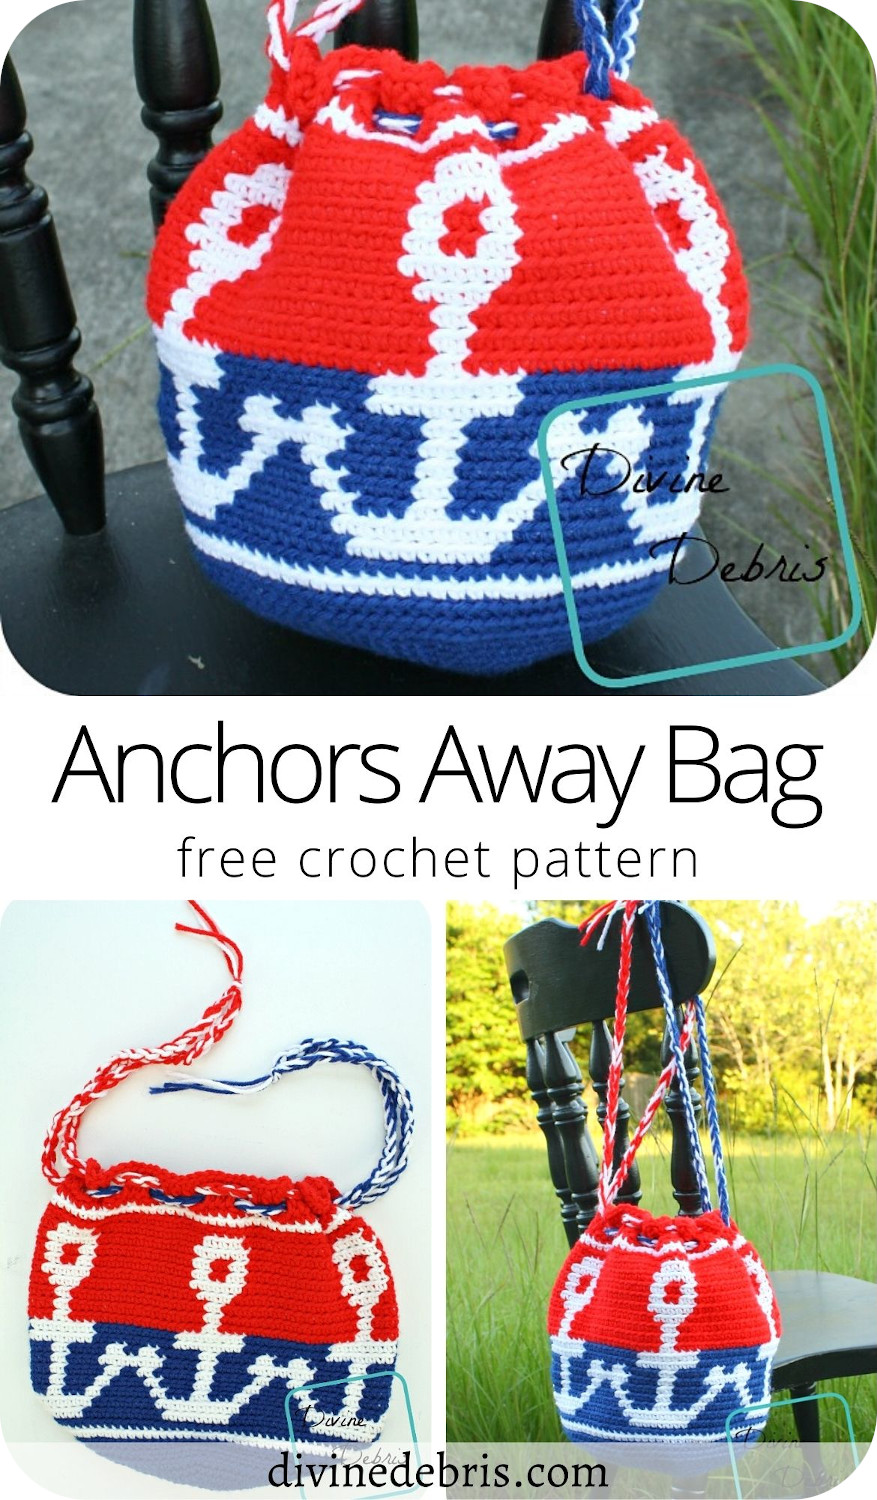 Check out the fun and nautical themed drawstring bag, the Anchors Away Bag, a free crochet pattern on DivineDebris.com